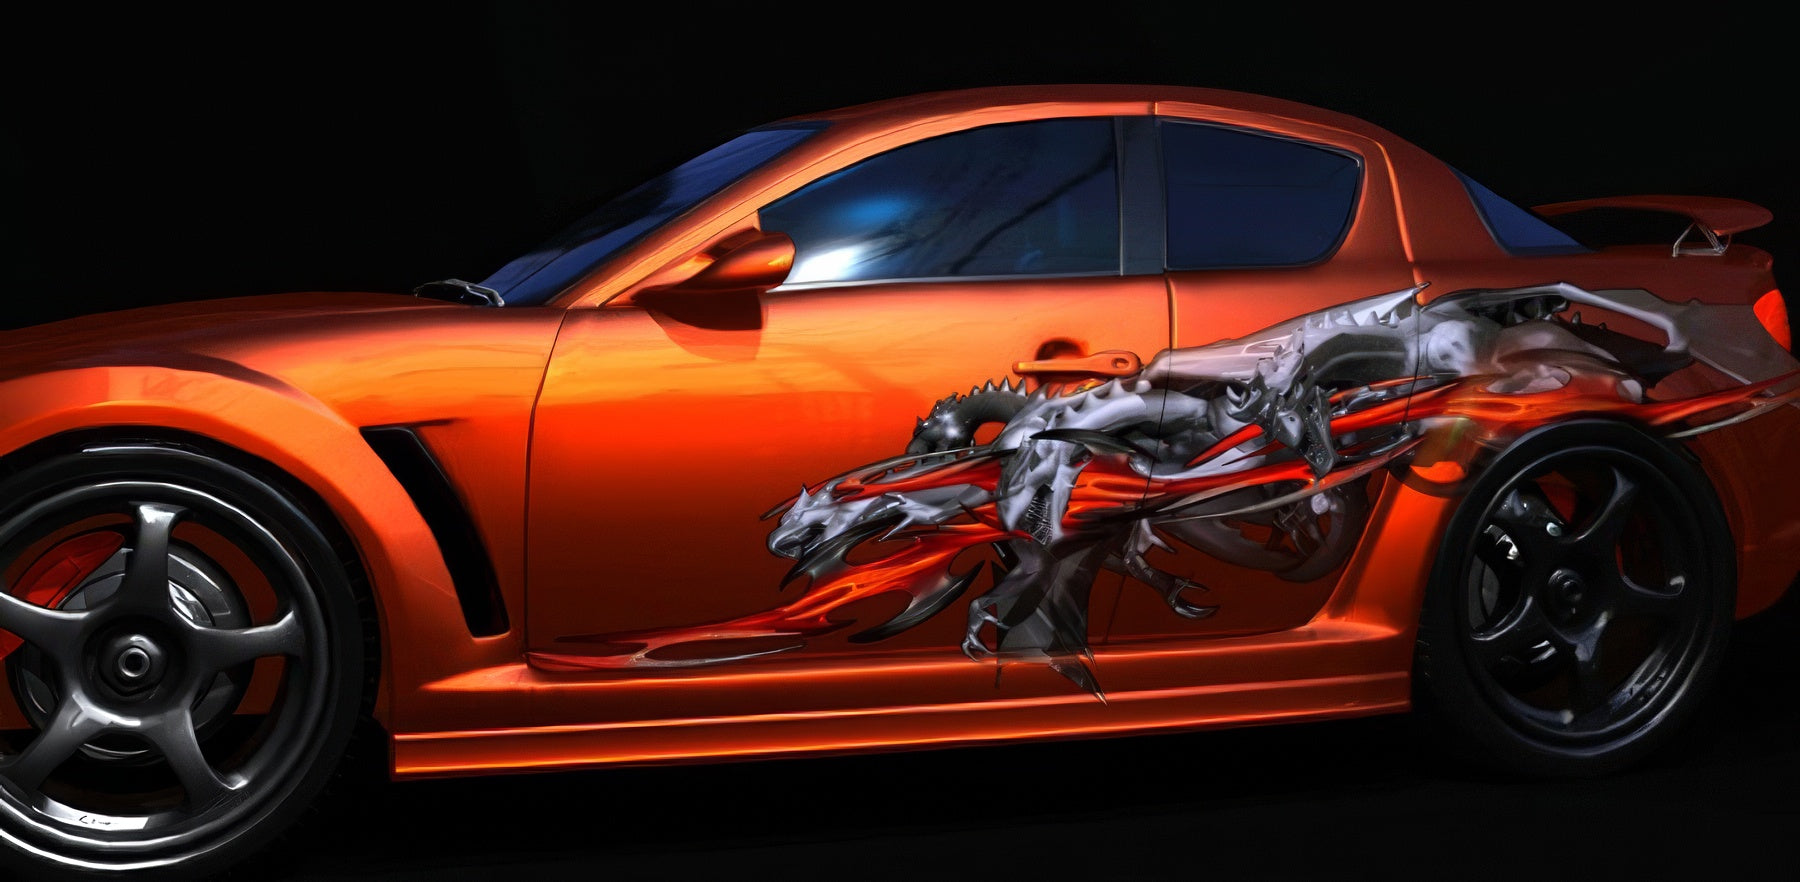 tribal dragons accent decals on the side of orange sports car